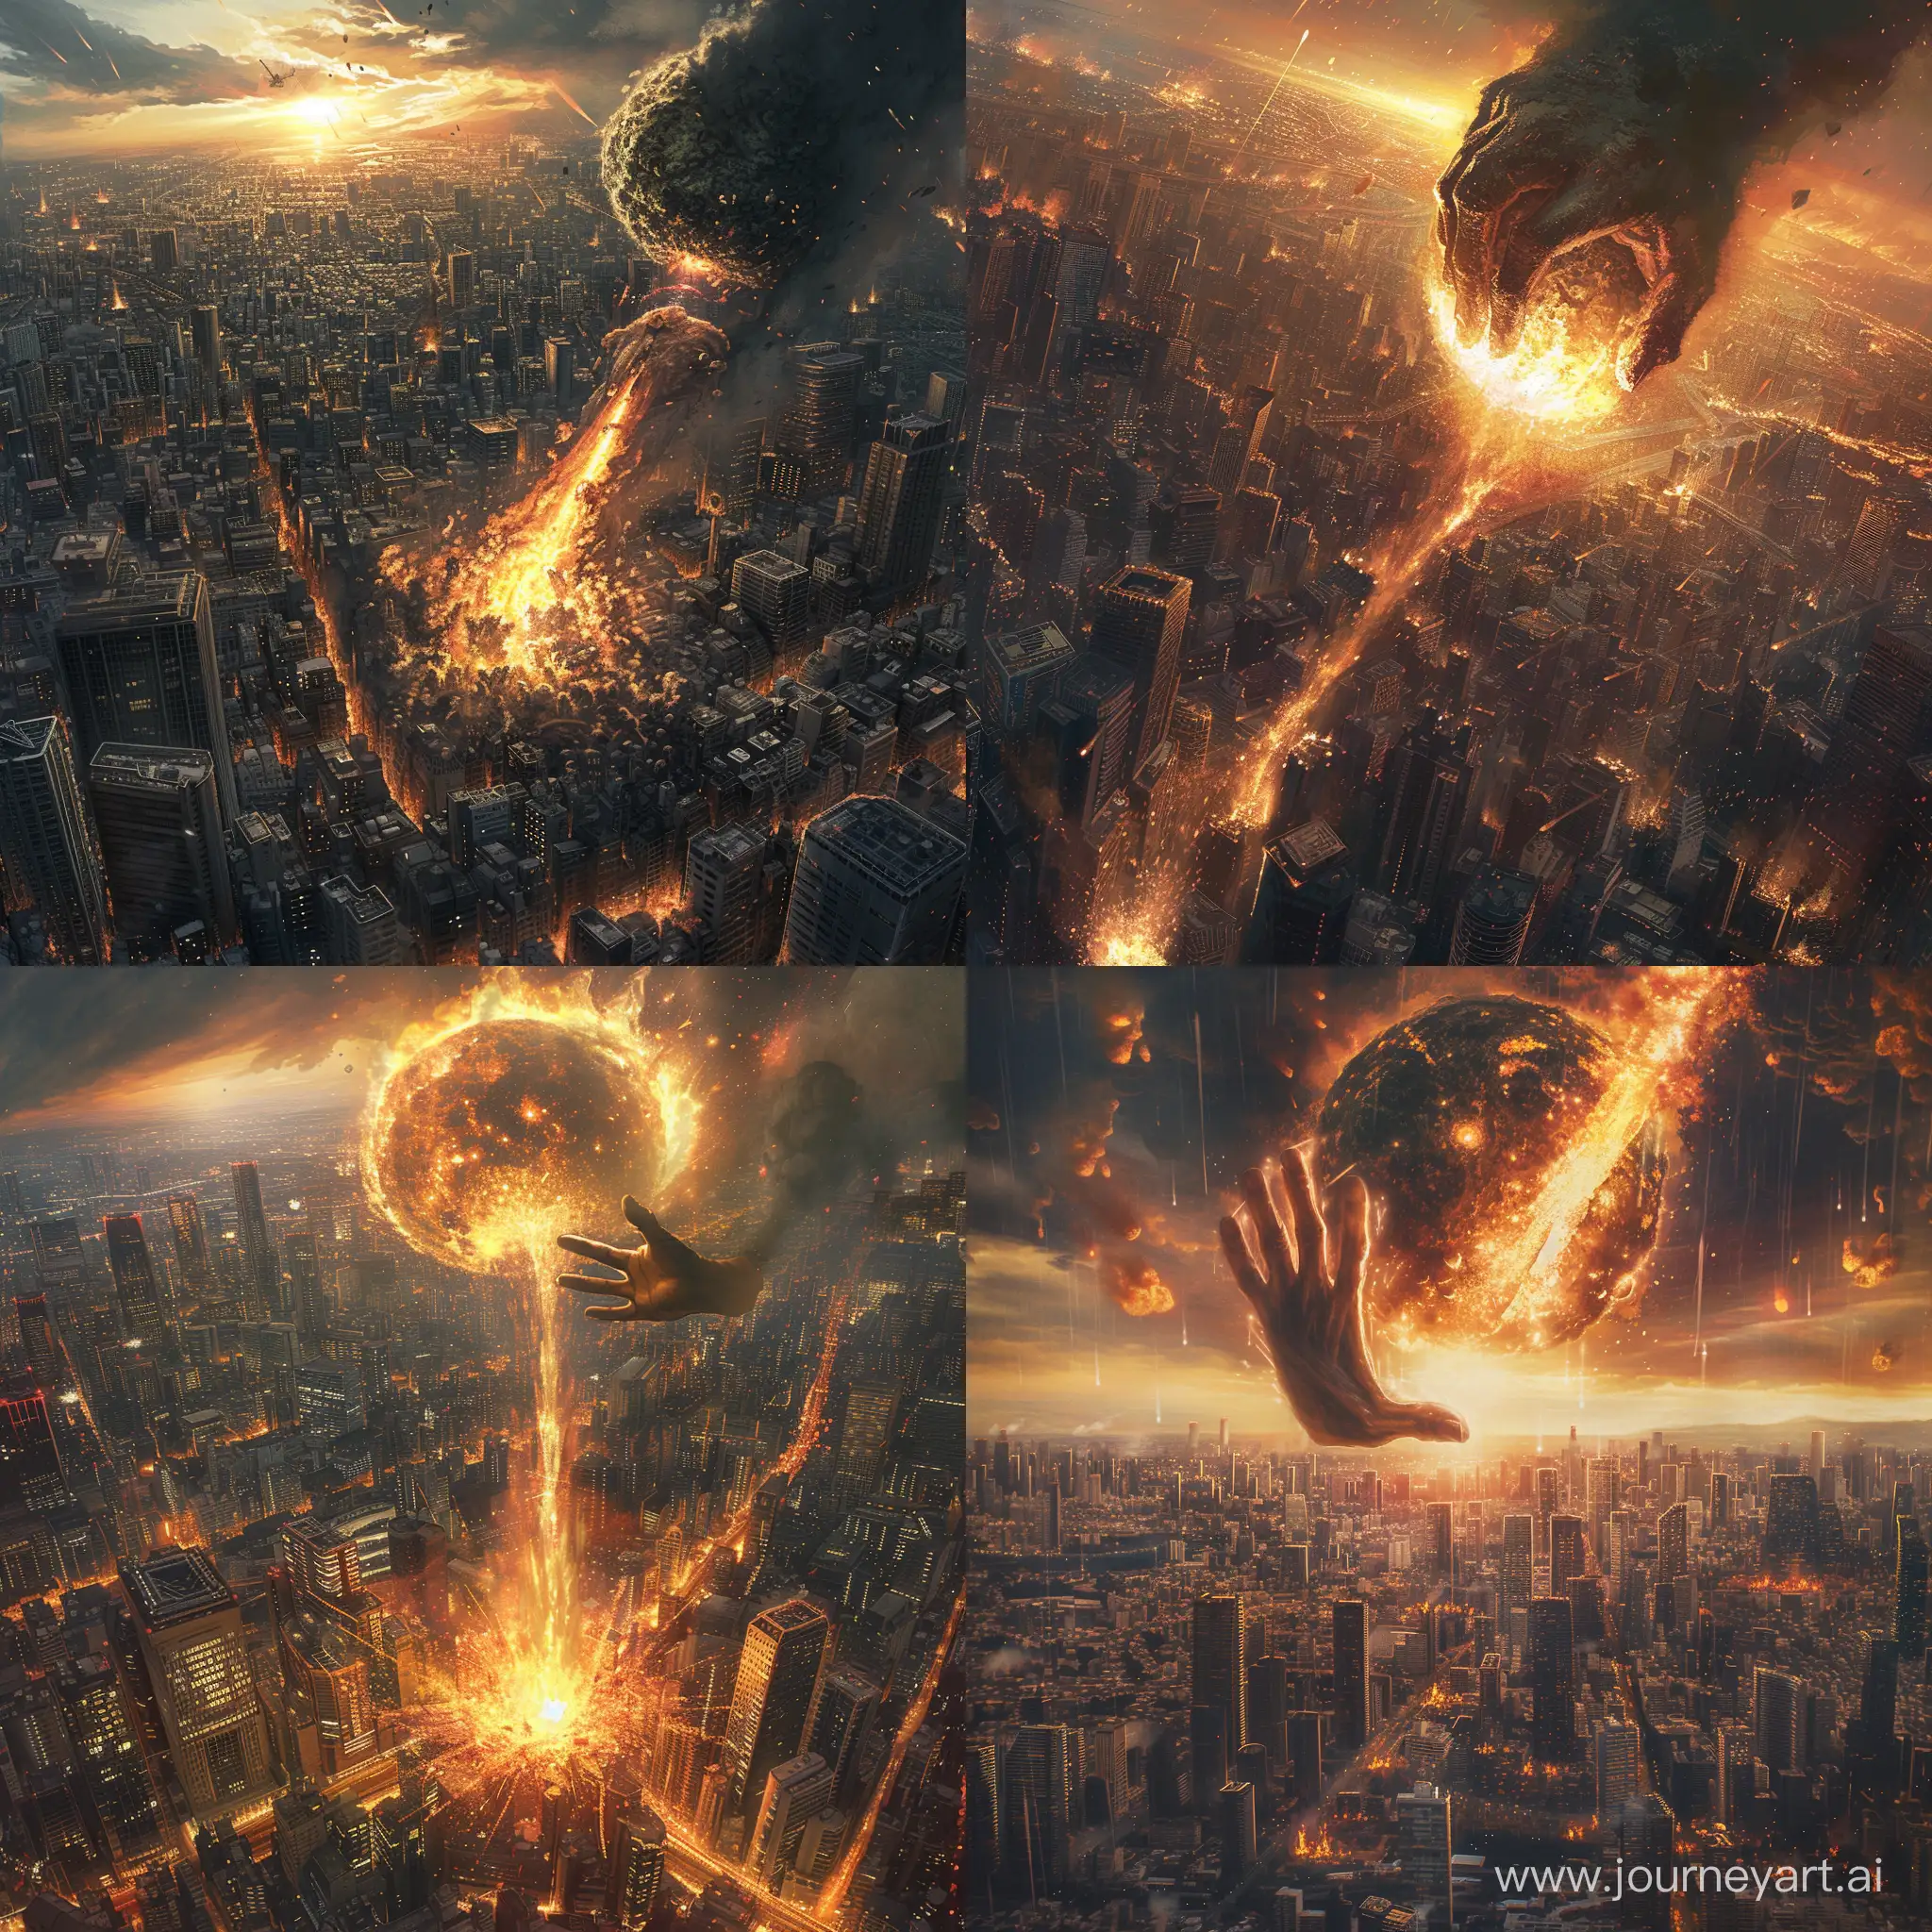 The image of the meteor coming in Tokyo, Japan, the one-fisted man, Saitama En, cut the meteor in half with his hand, the whole city is on fire, the style of the image is digital painting.